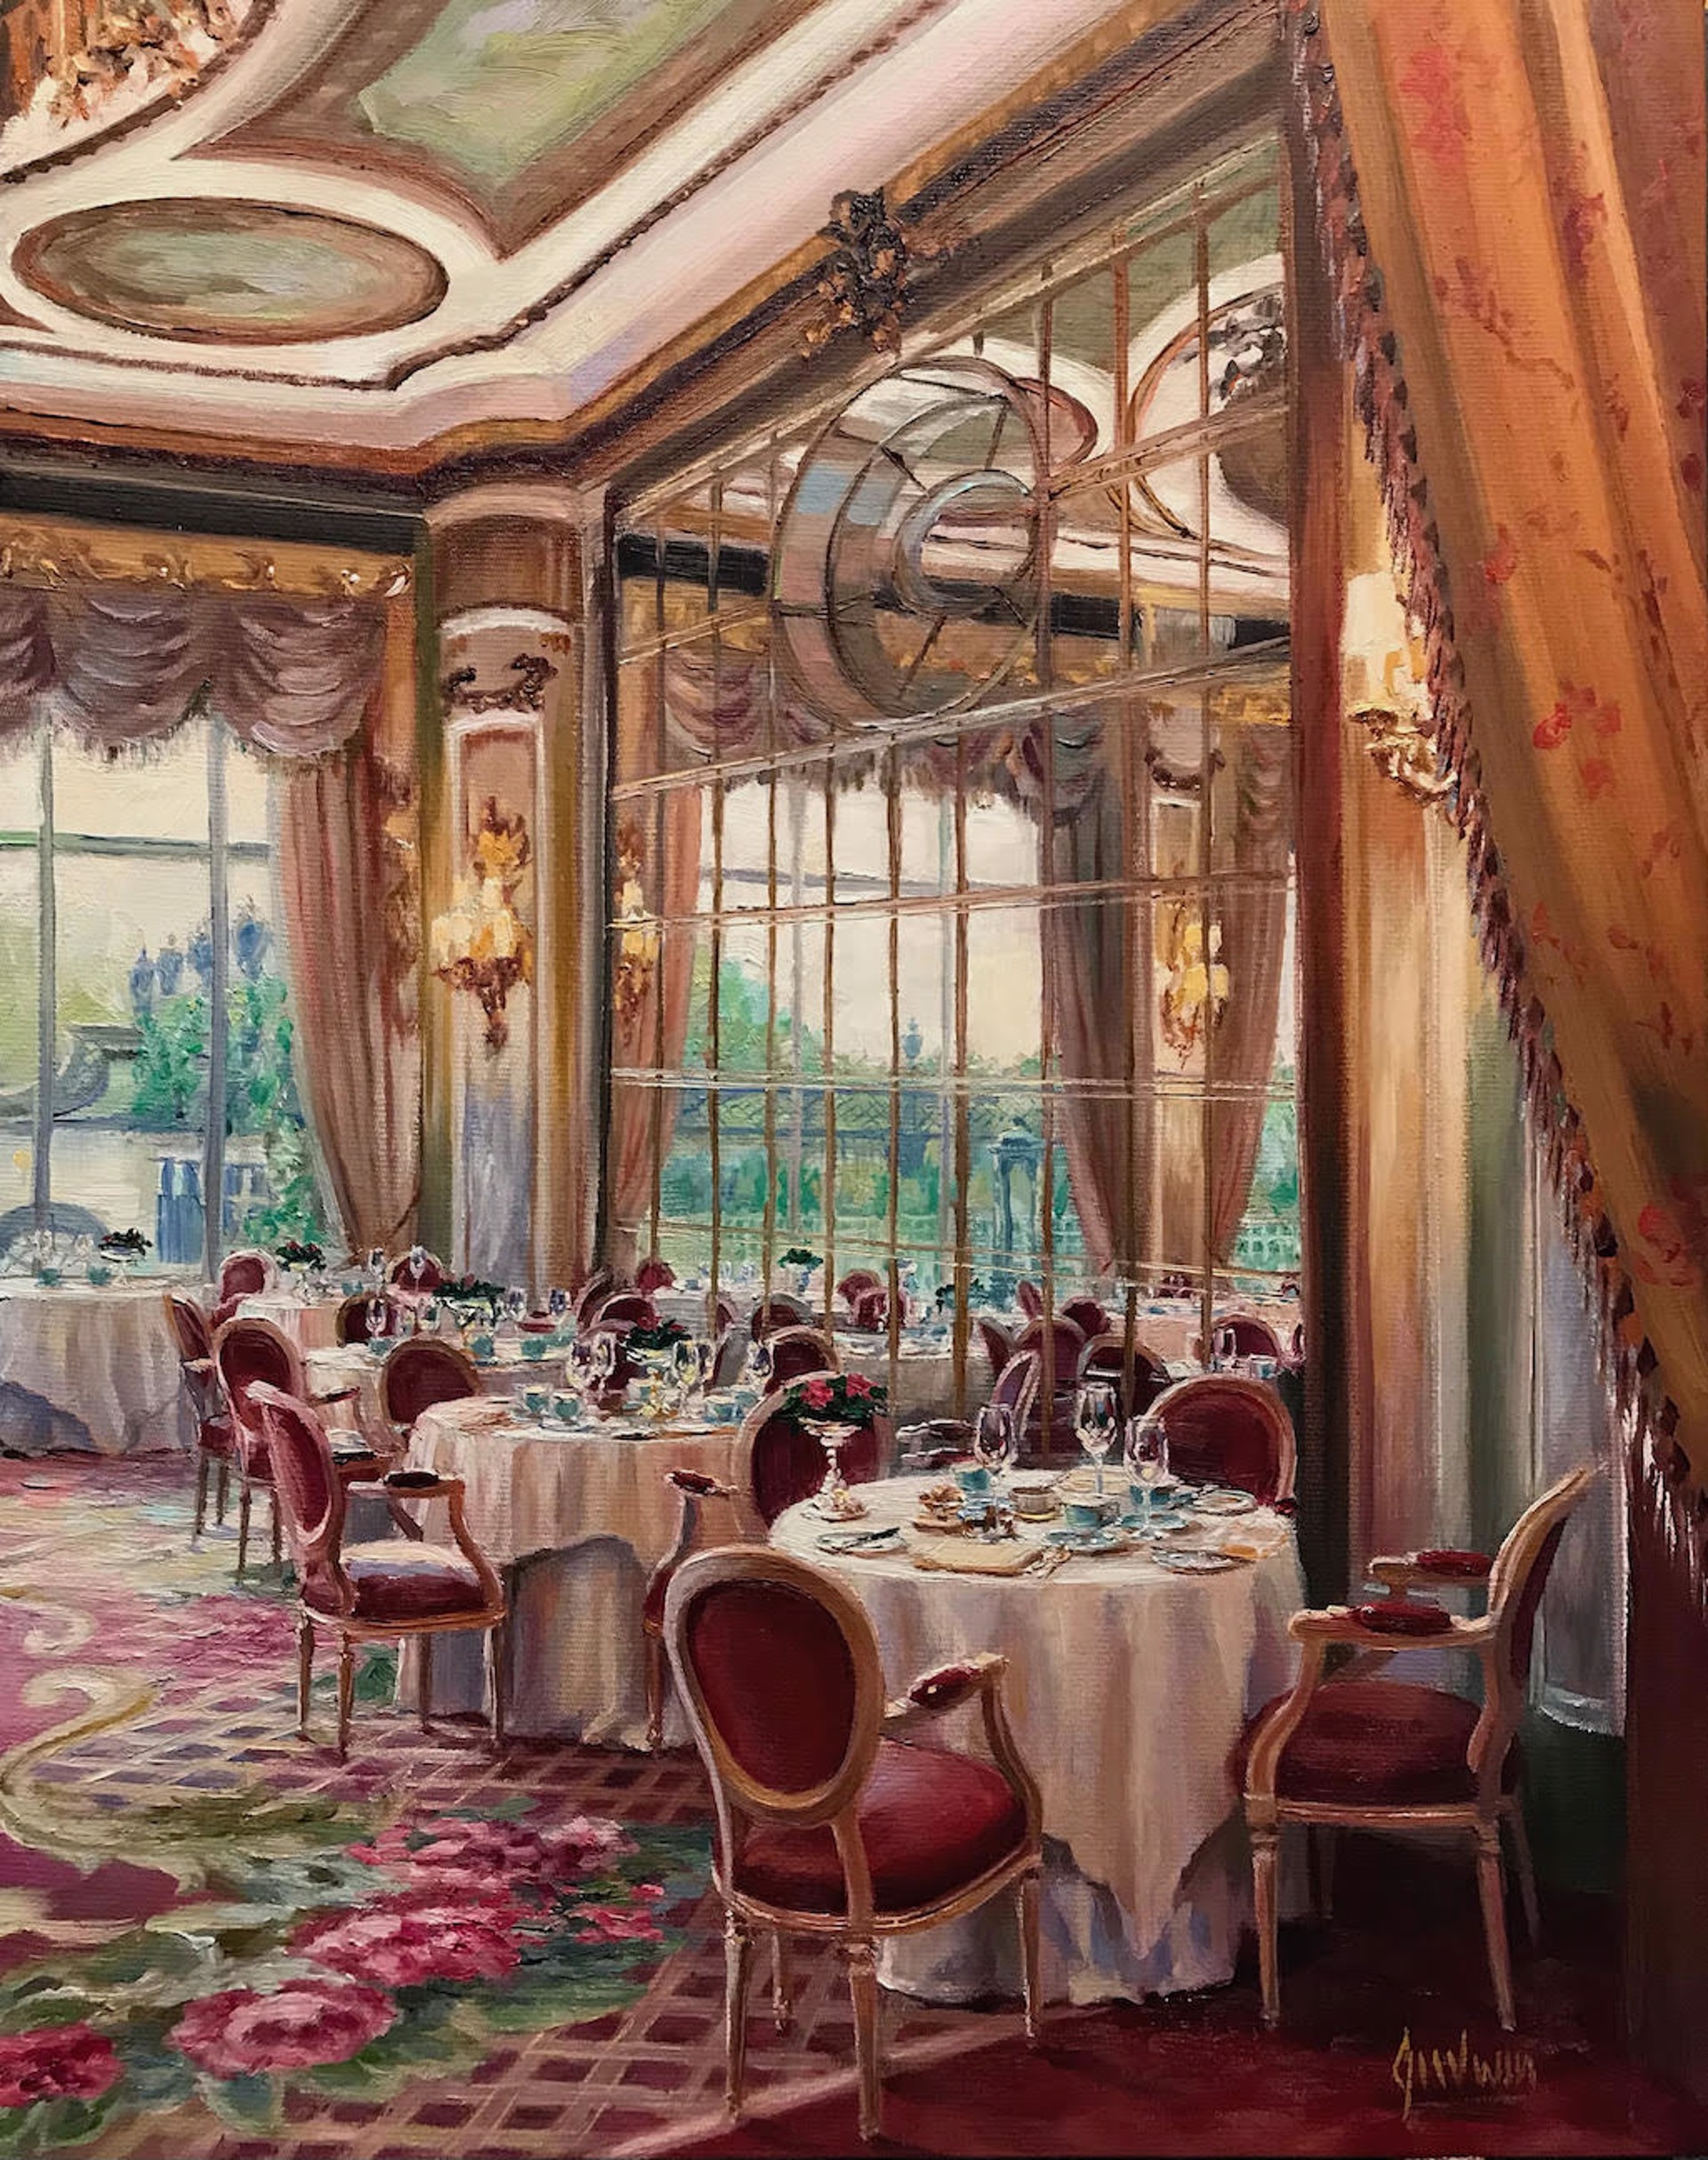 Reflections in the Ritz Dining Room, London by Lindsay Goodwin